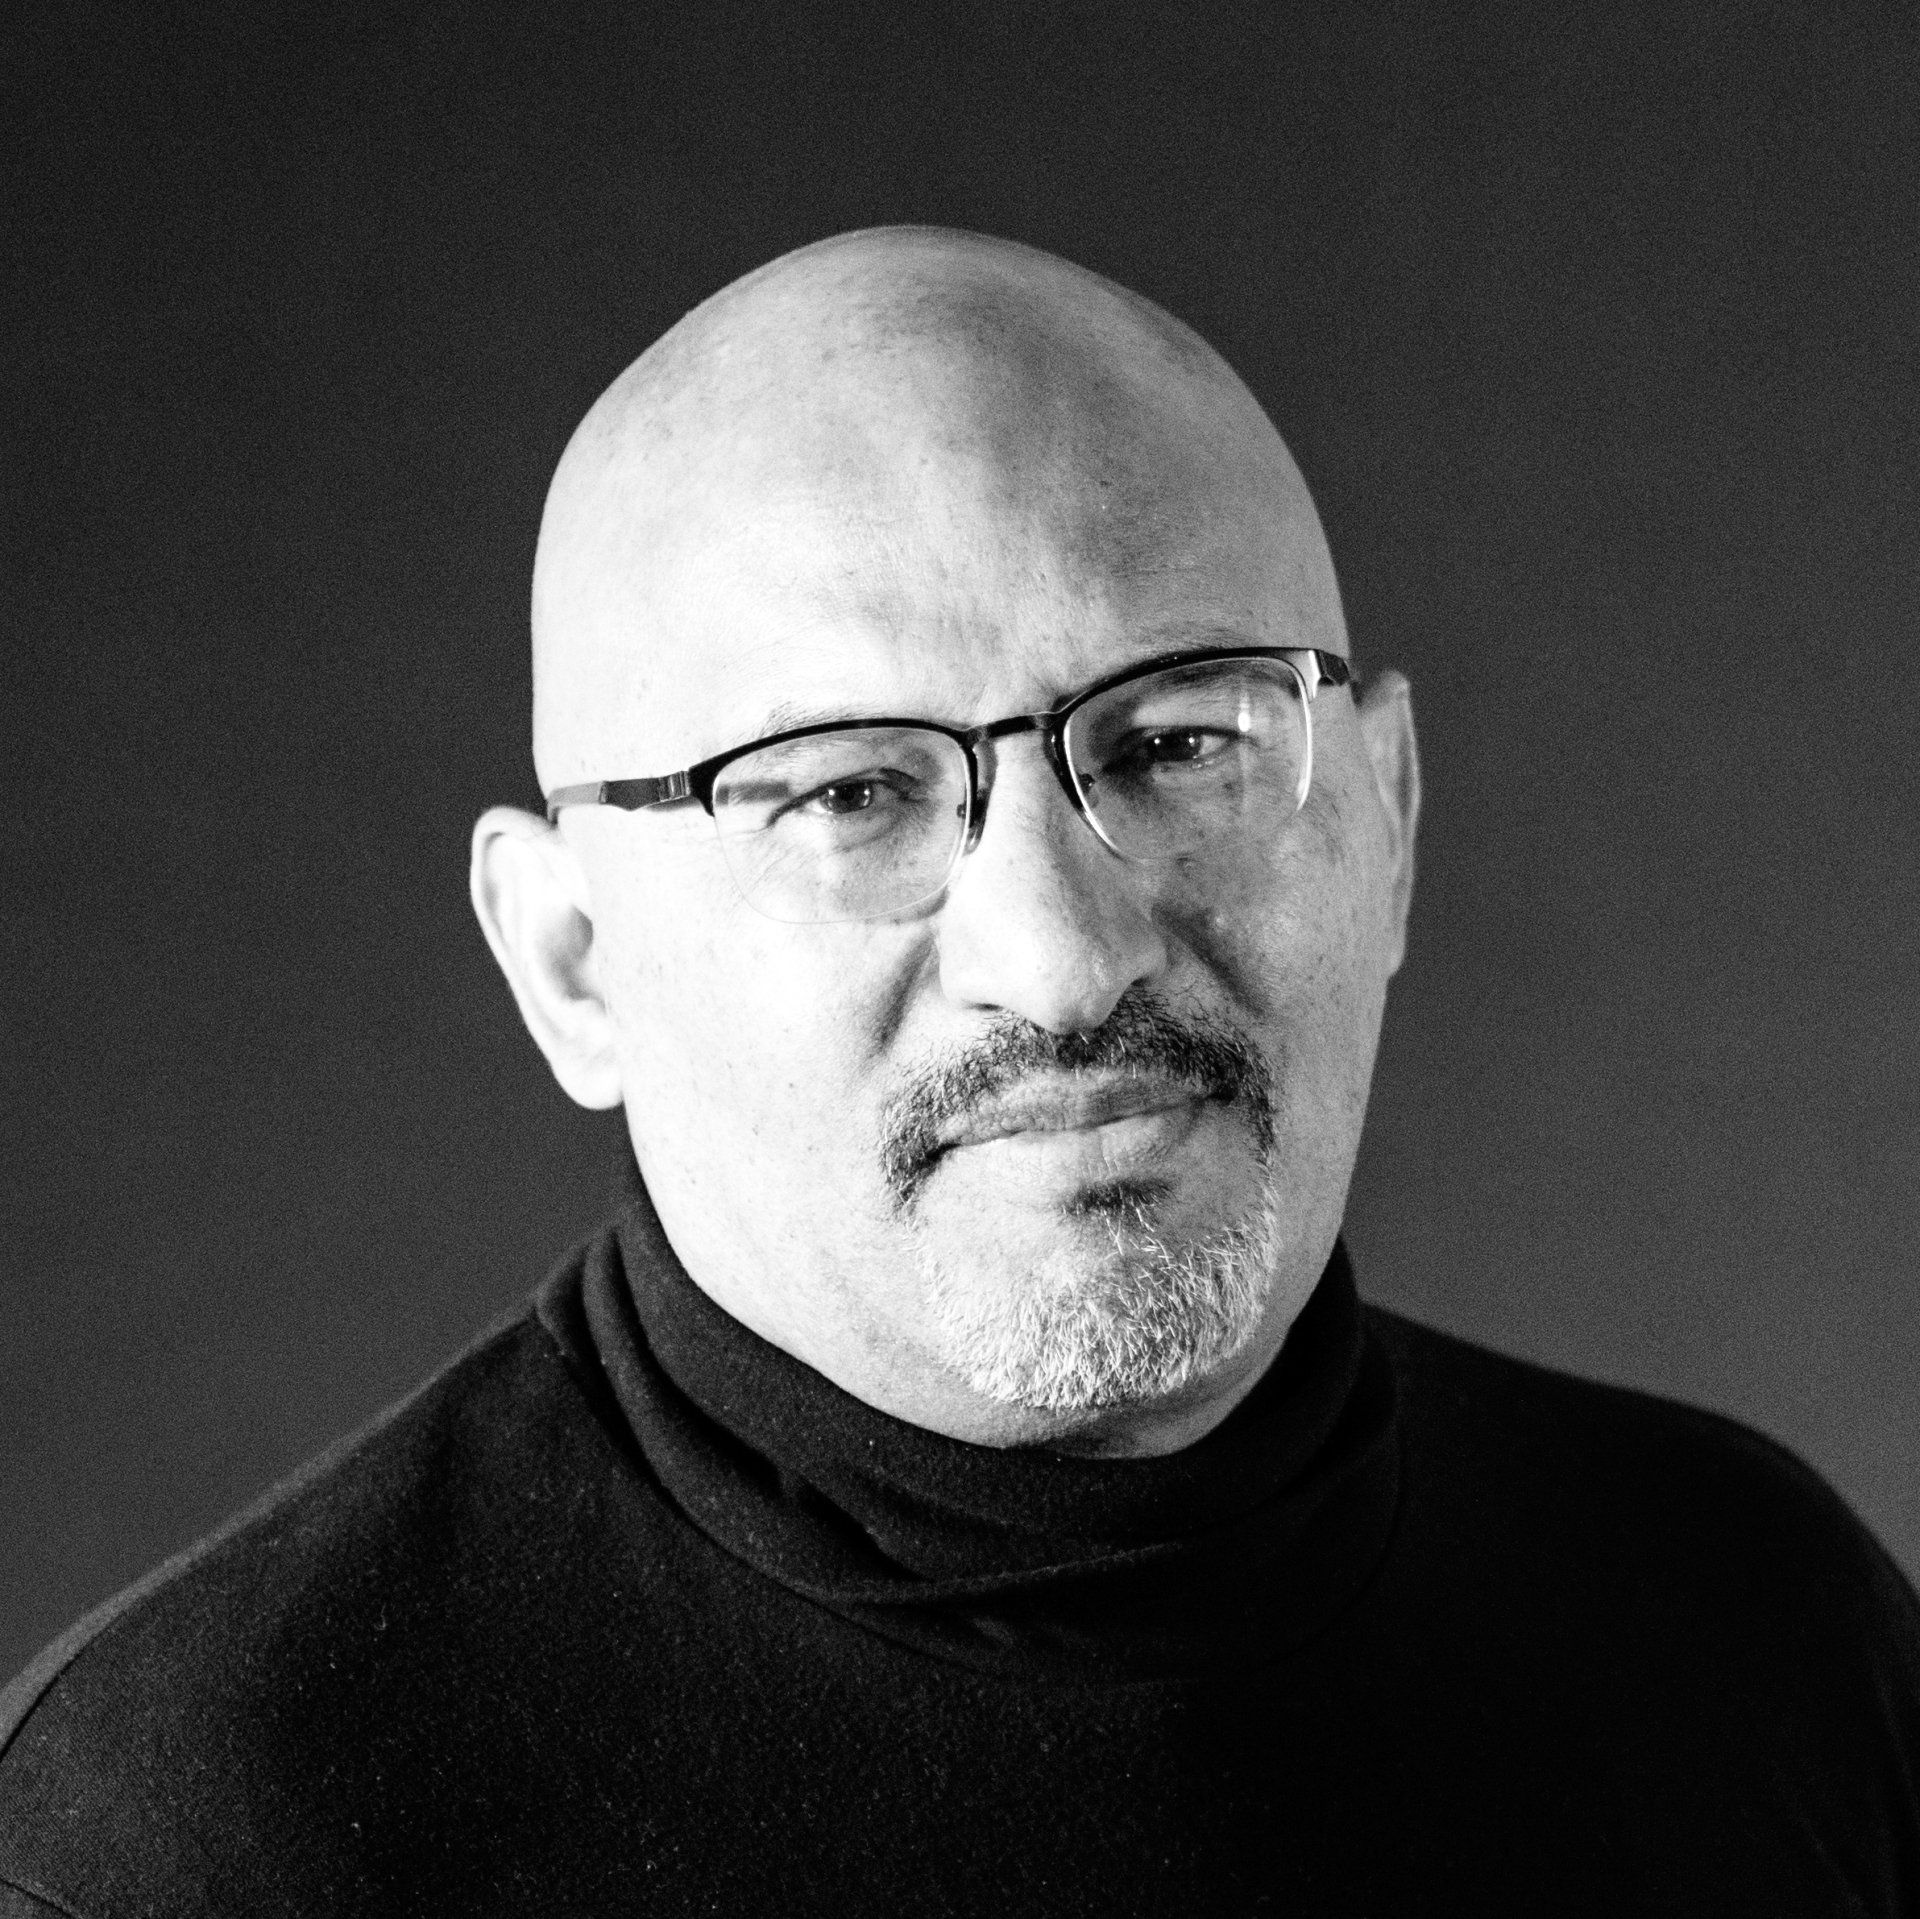 A bald man with glasses and a beard is wearing a black turtleneck.